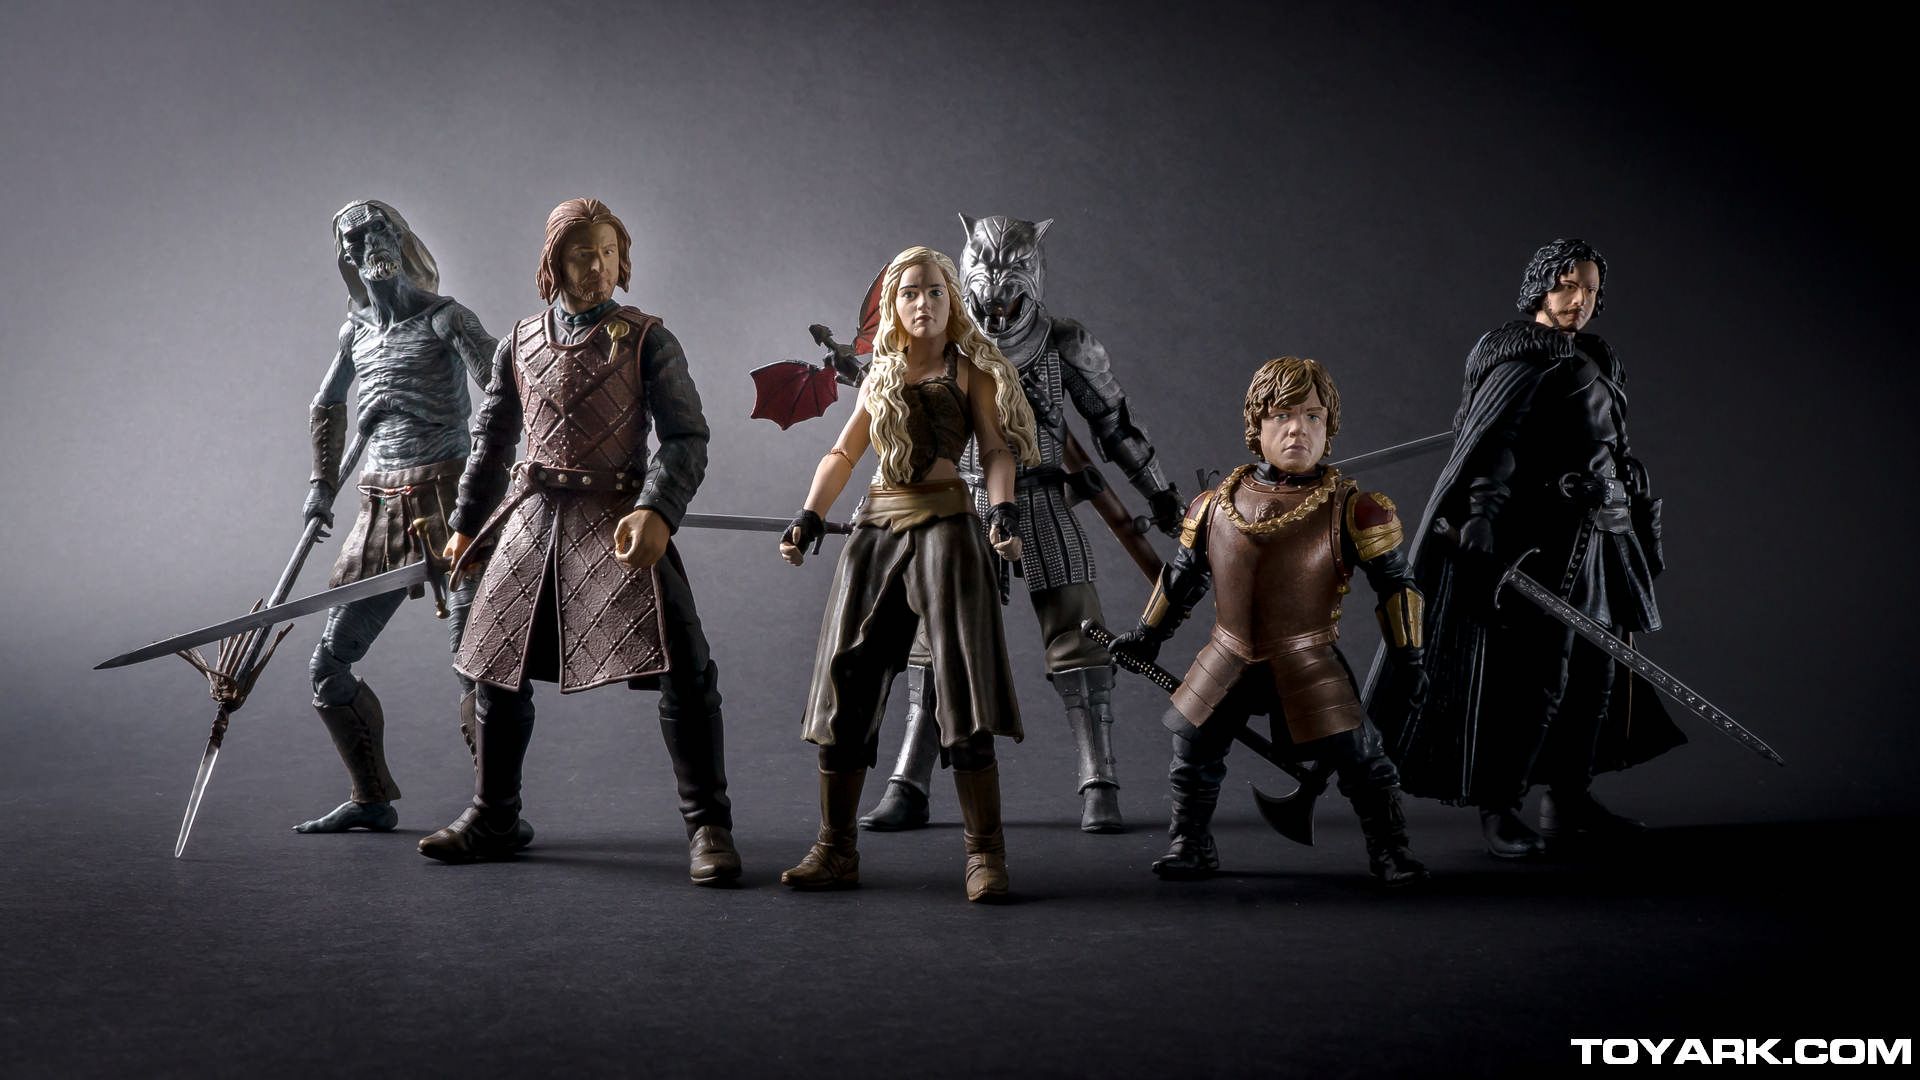 Game of Thrones Action Figures. Game Of Thrones Wallpaper